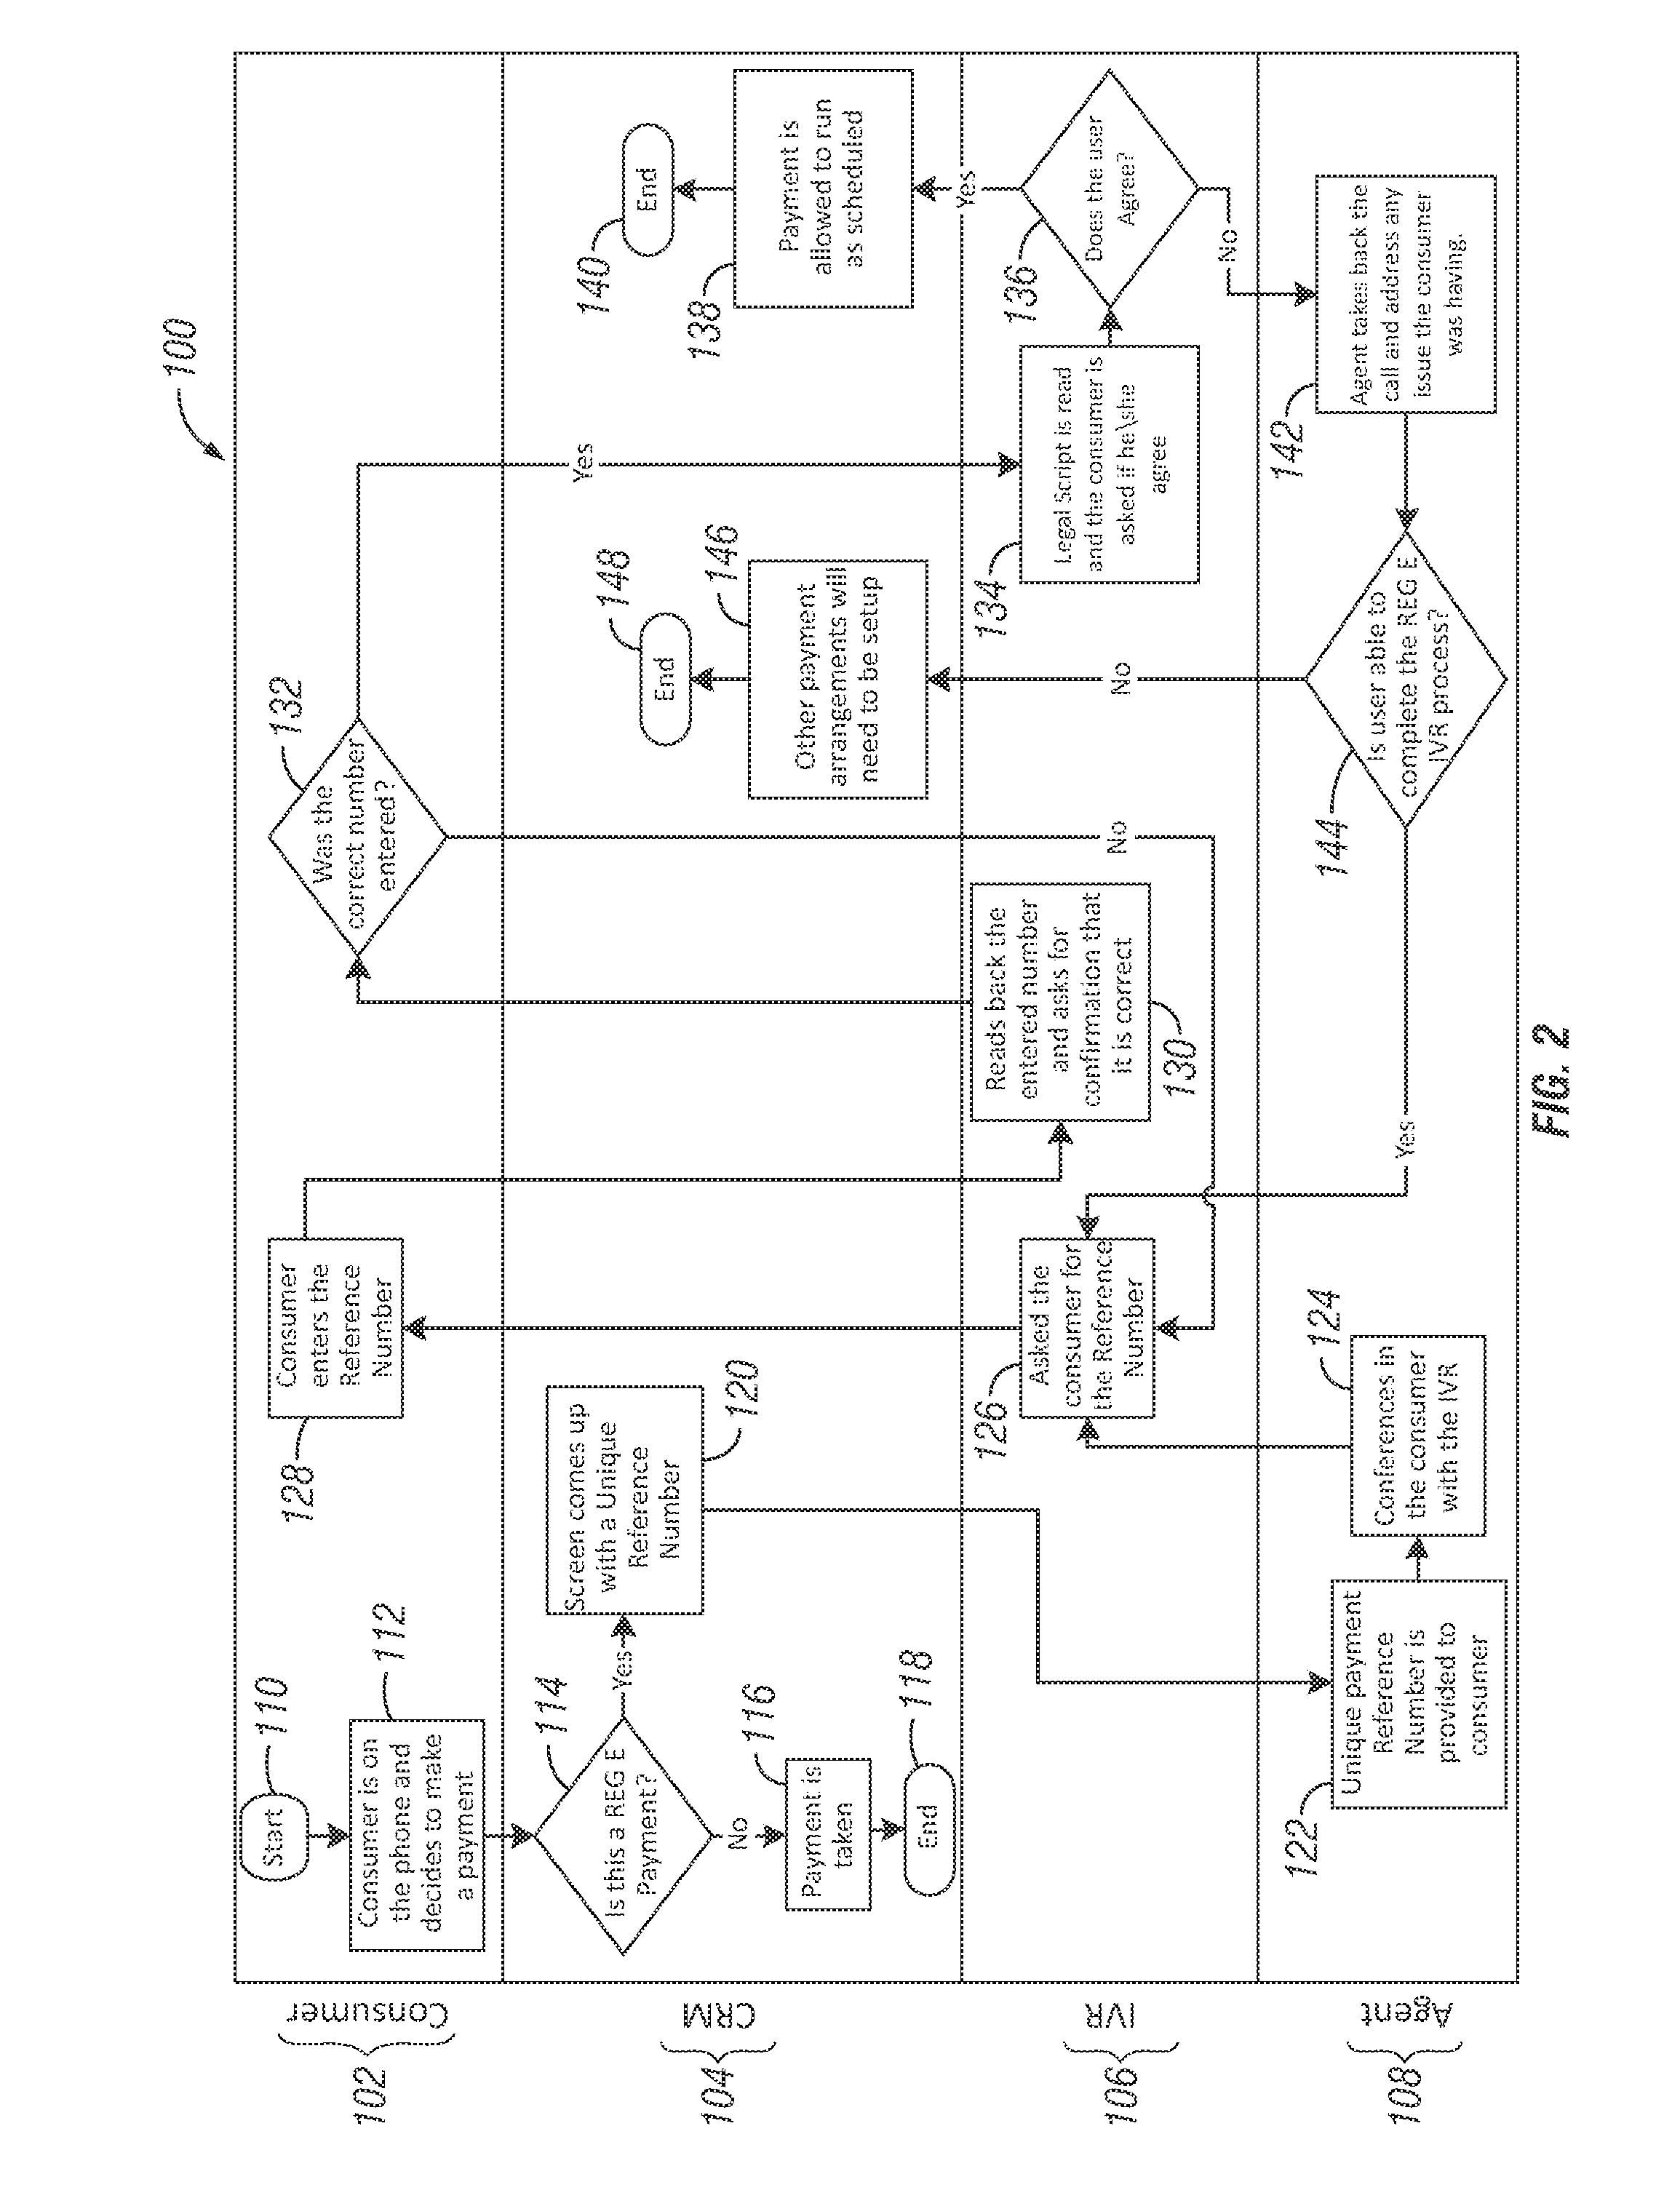 Interactive voice response system with electronic signature functionality